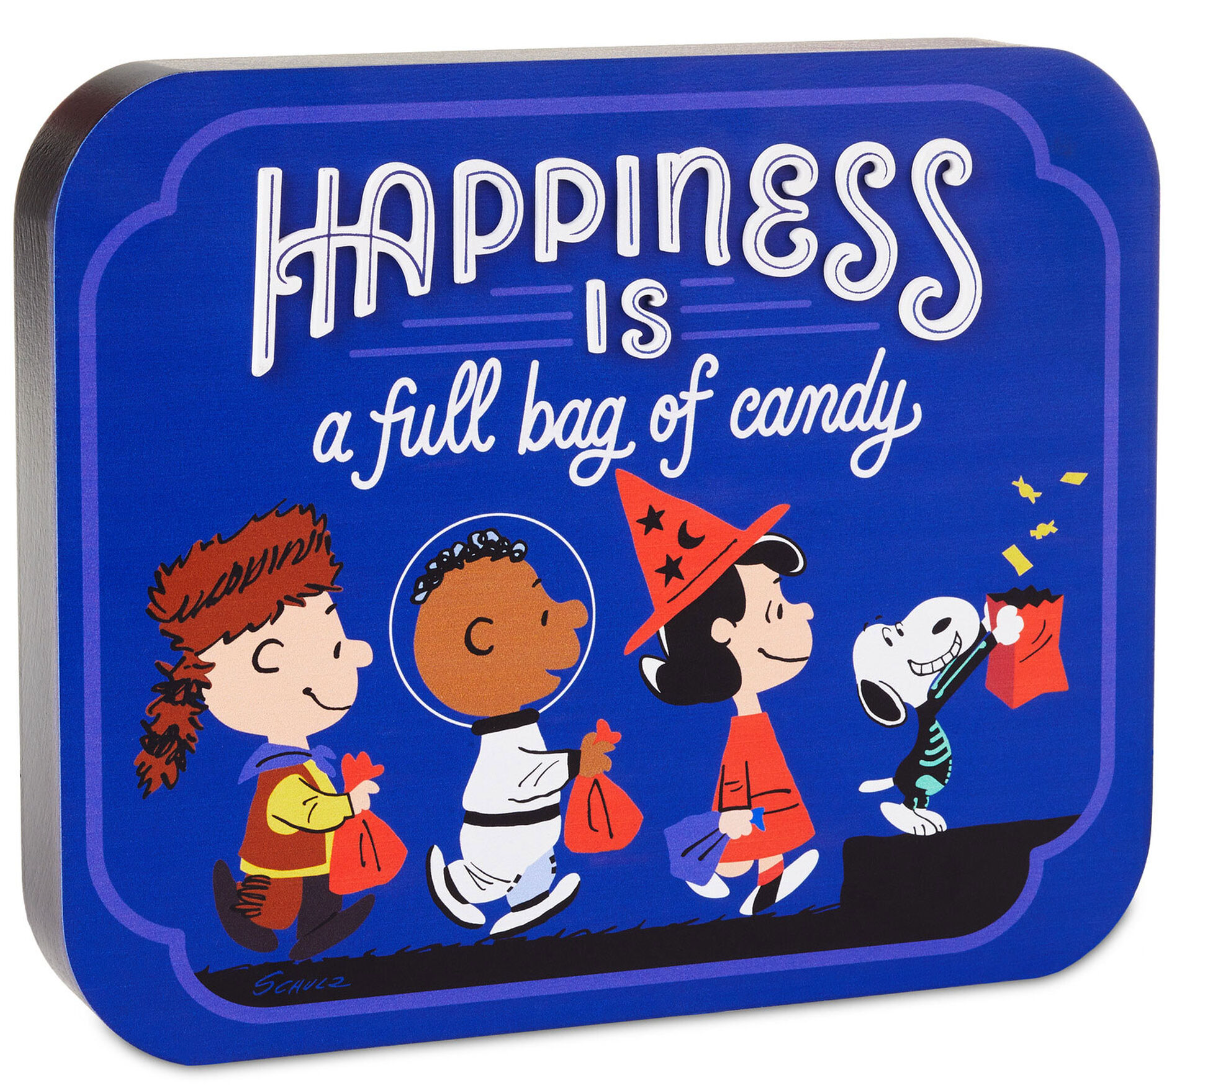 Hallmark Peanuts Happiness Is a Full Bag of Candy Quote Sign 9.5 x 7 Inc New